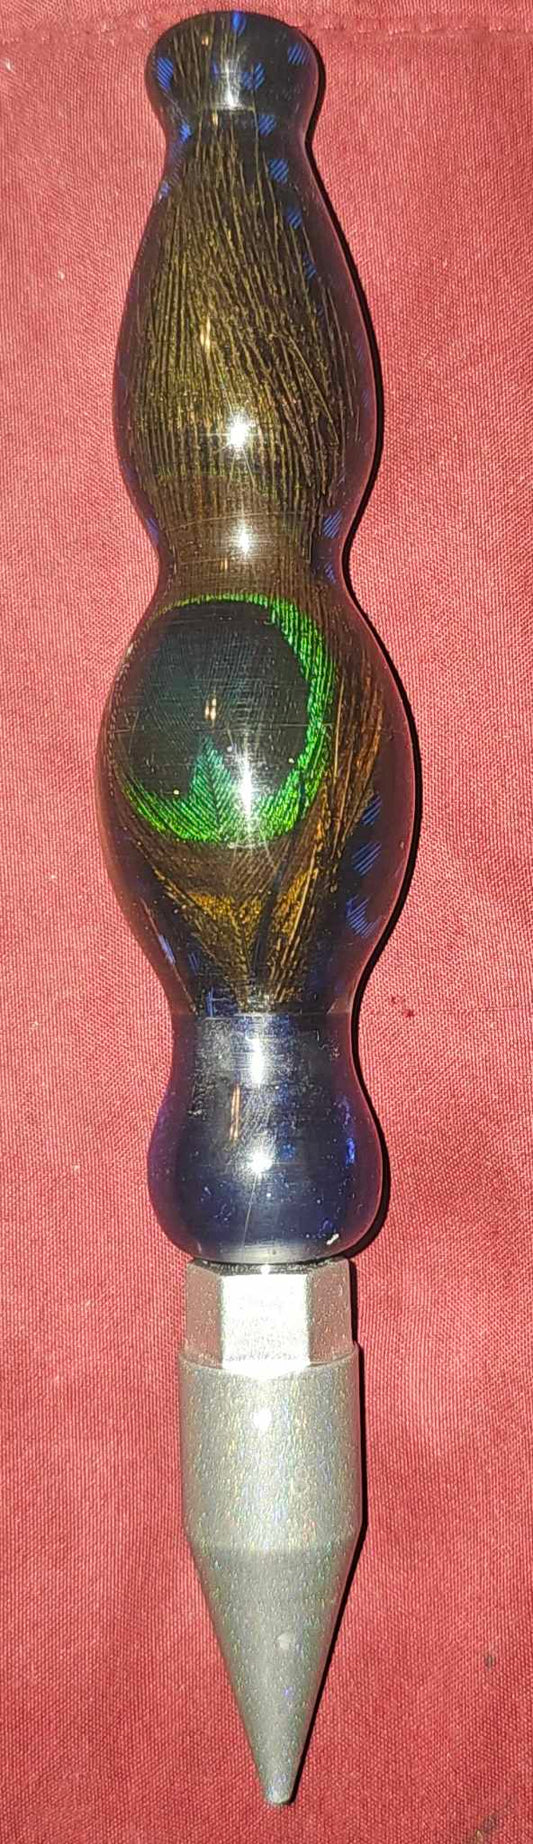 Peacock Pen MEDIUM THICK  6 inches with tip. Picture is taken with Flash on. (Pre-Turned)